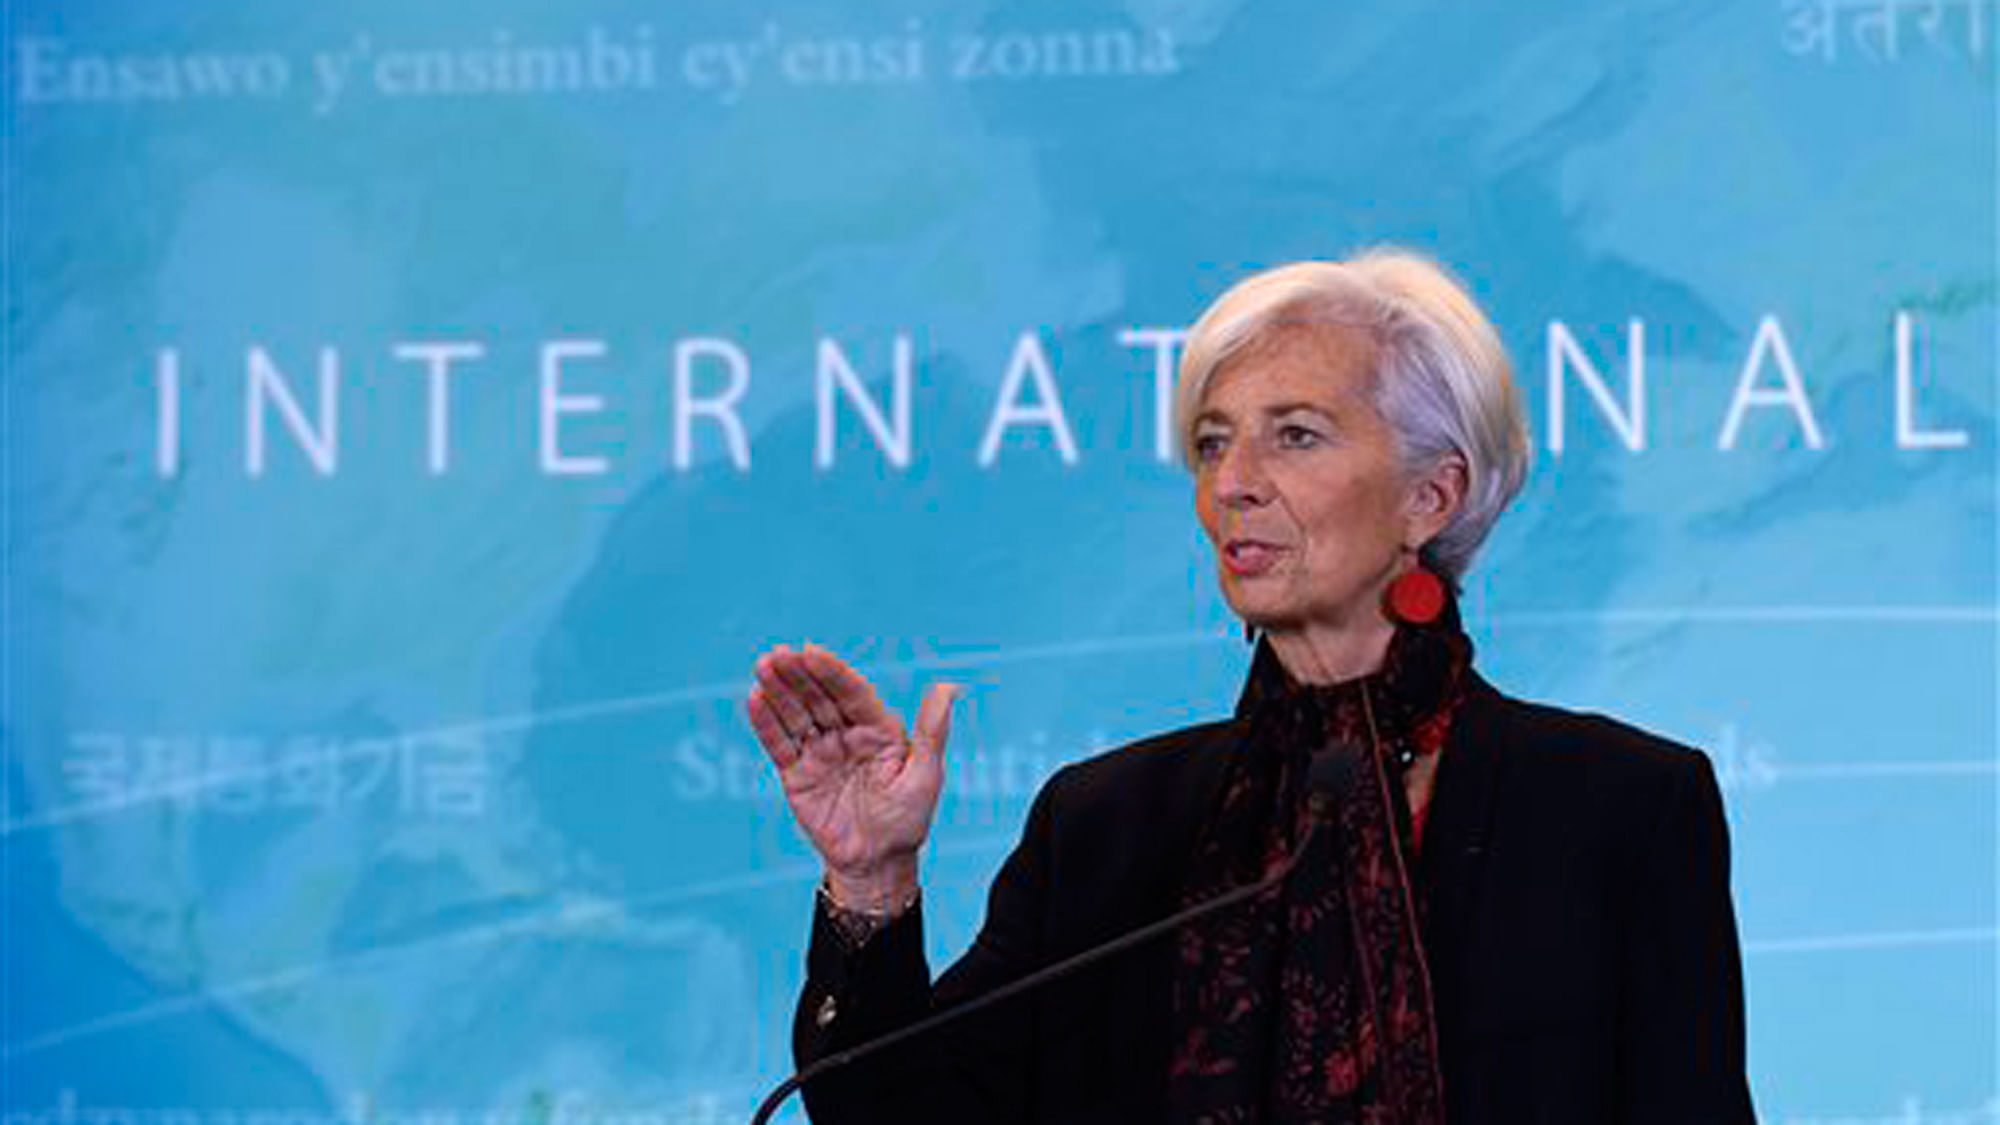 Christine Lagarde triggered the hunt for a successor as she resigned as managing director of the International Monetary Fund in light of her nomination to be the next president of the European Central Bank.